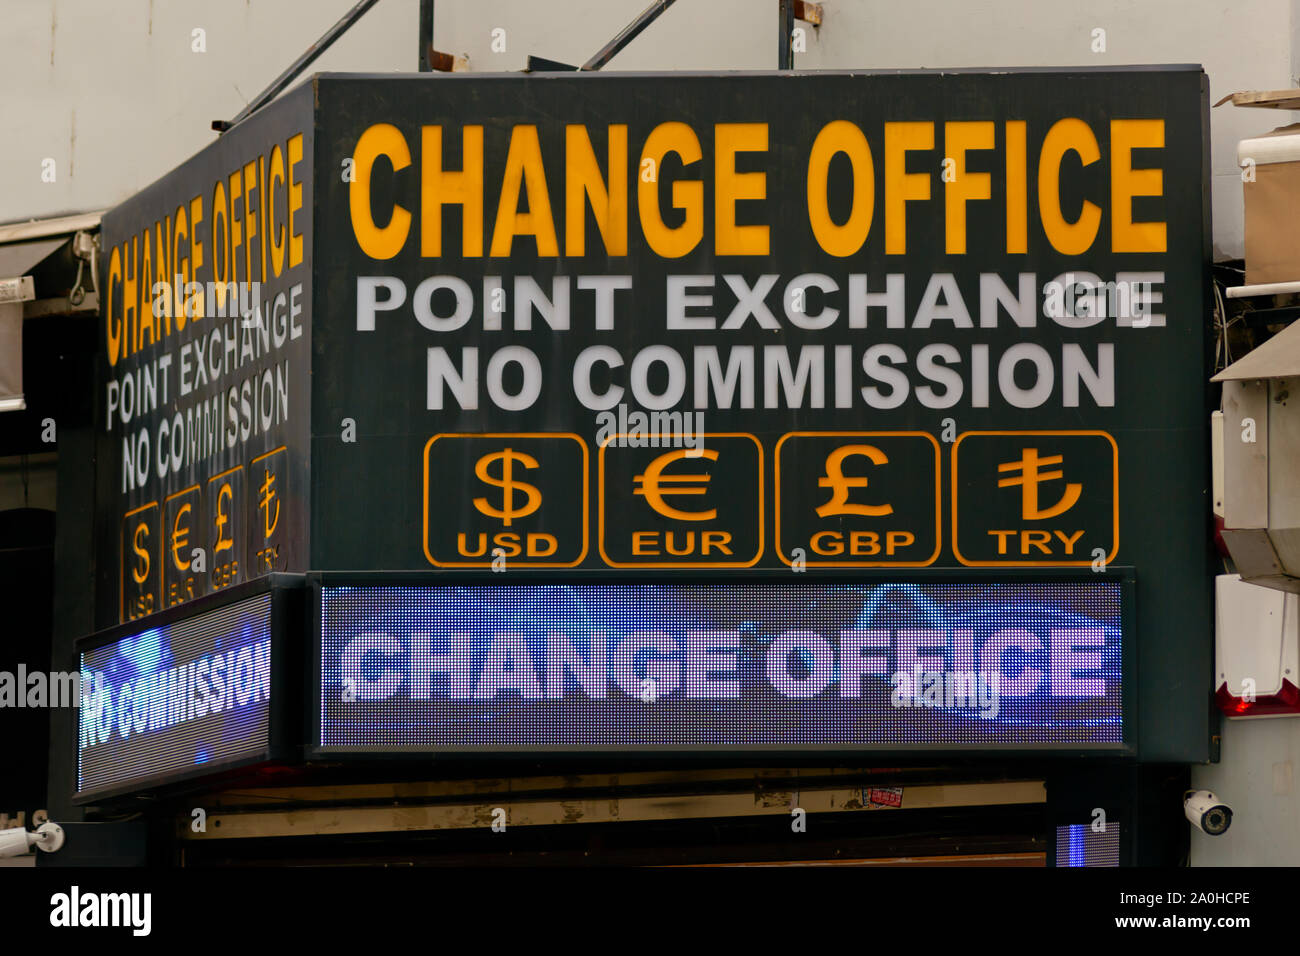 Generic led board box with currency signs and 'CHANGE OFFICE' text. USD, EUR, GBP and TRY currency signs for Dolar, Euro, Pound and Turkish Lira. Stock Photo